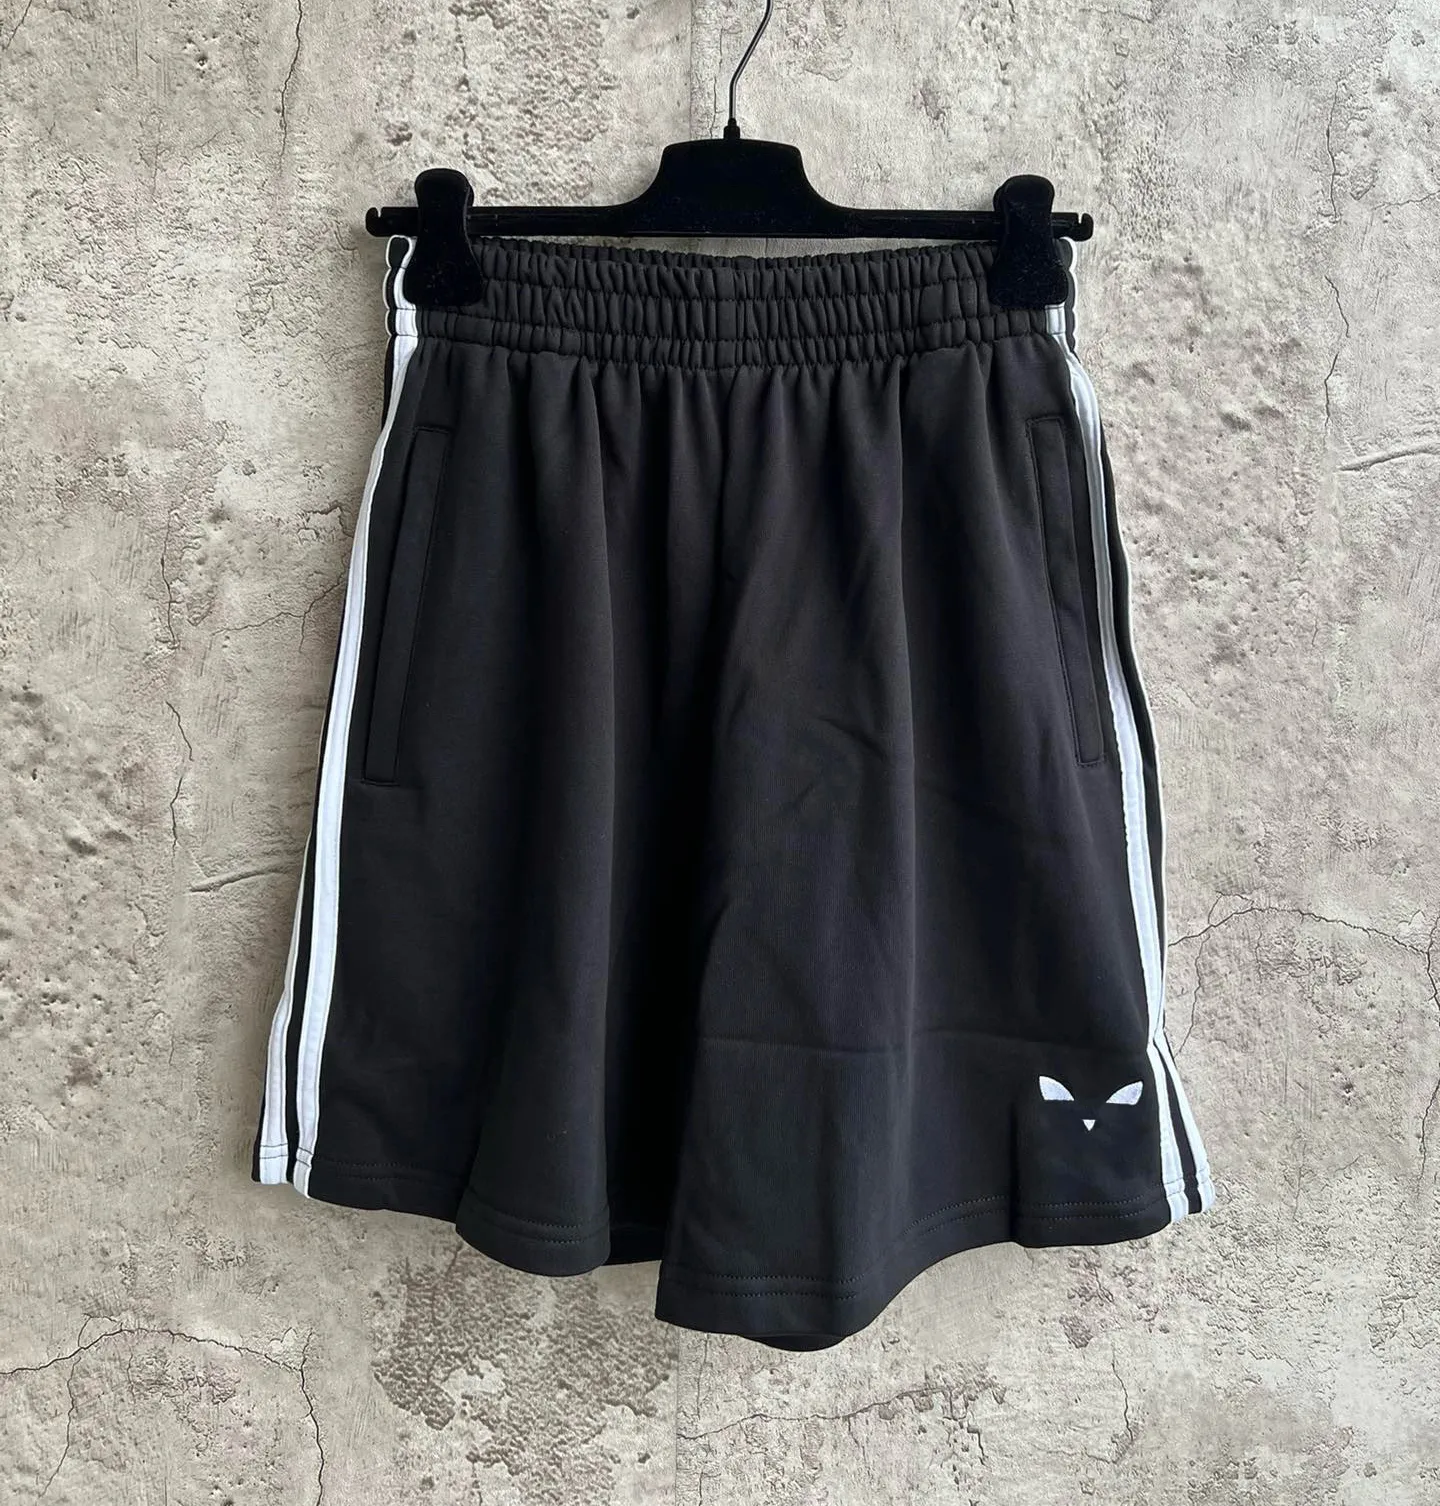 Men's Plus Size Shorts Waterproof Outdoor Quick Dry Hiking Shorts Running Workout Shorts Casual Quantity Customized Spandex Anti Picture Technics r7r40